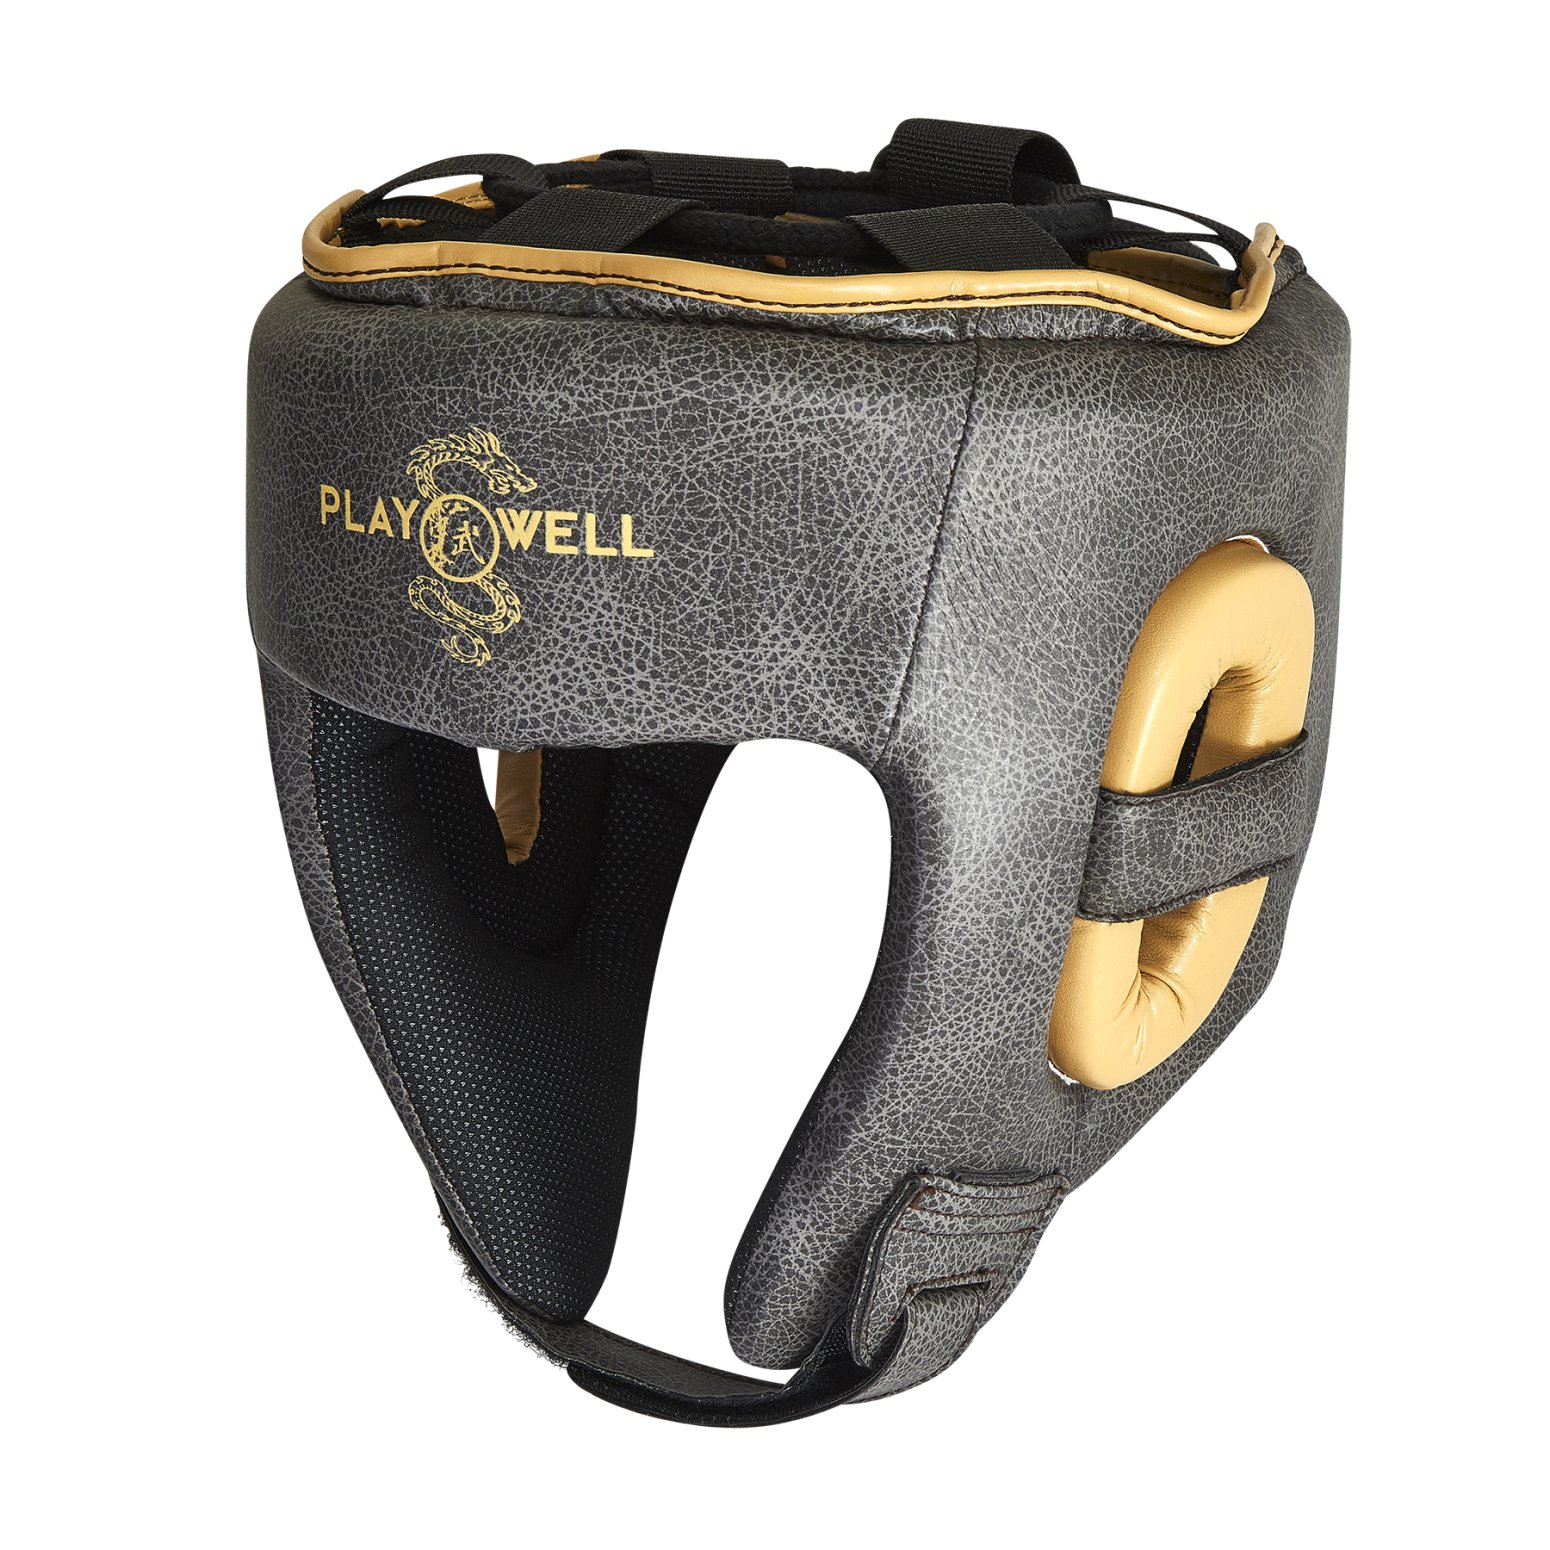 Playwell \"Vintage Series\" Boxing / MMA Head Guard